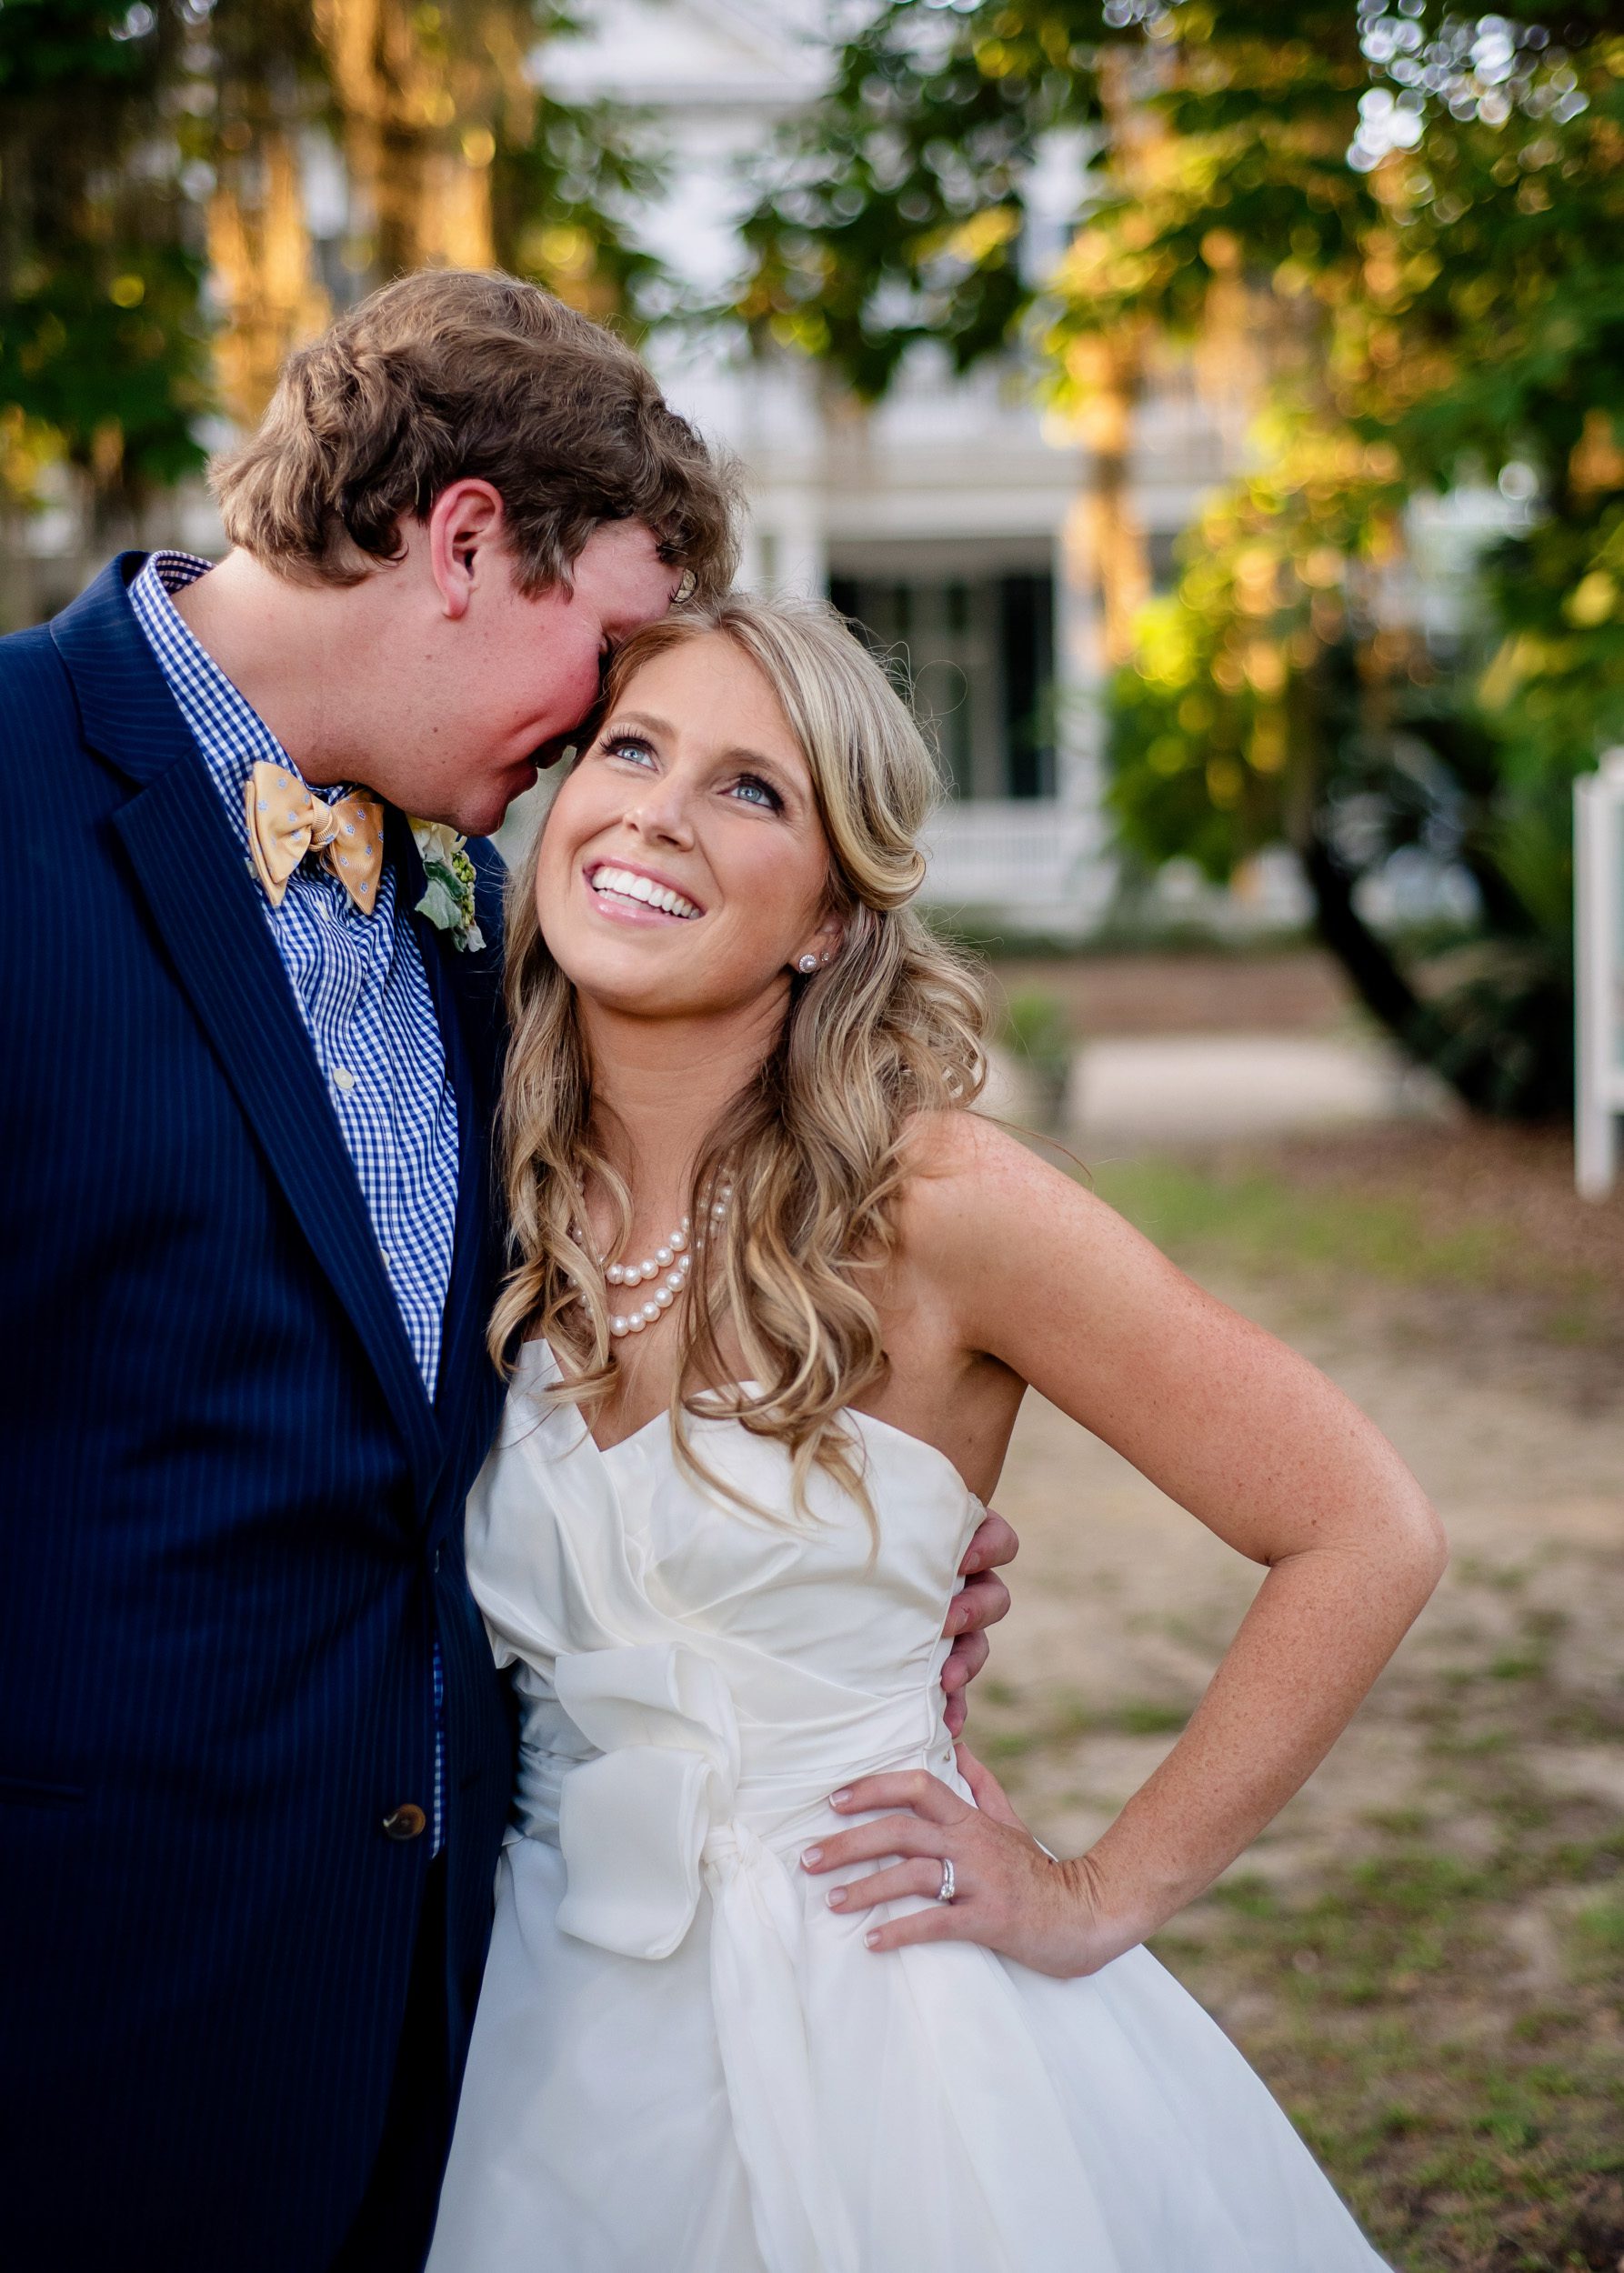 Preppy bride and groom cuddle and laugh before their wedding reception at Goodwood in Tallahassee, FL.